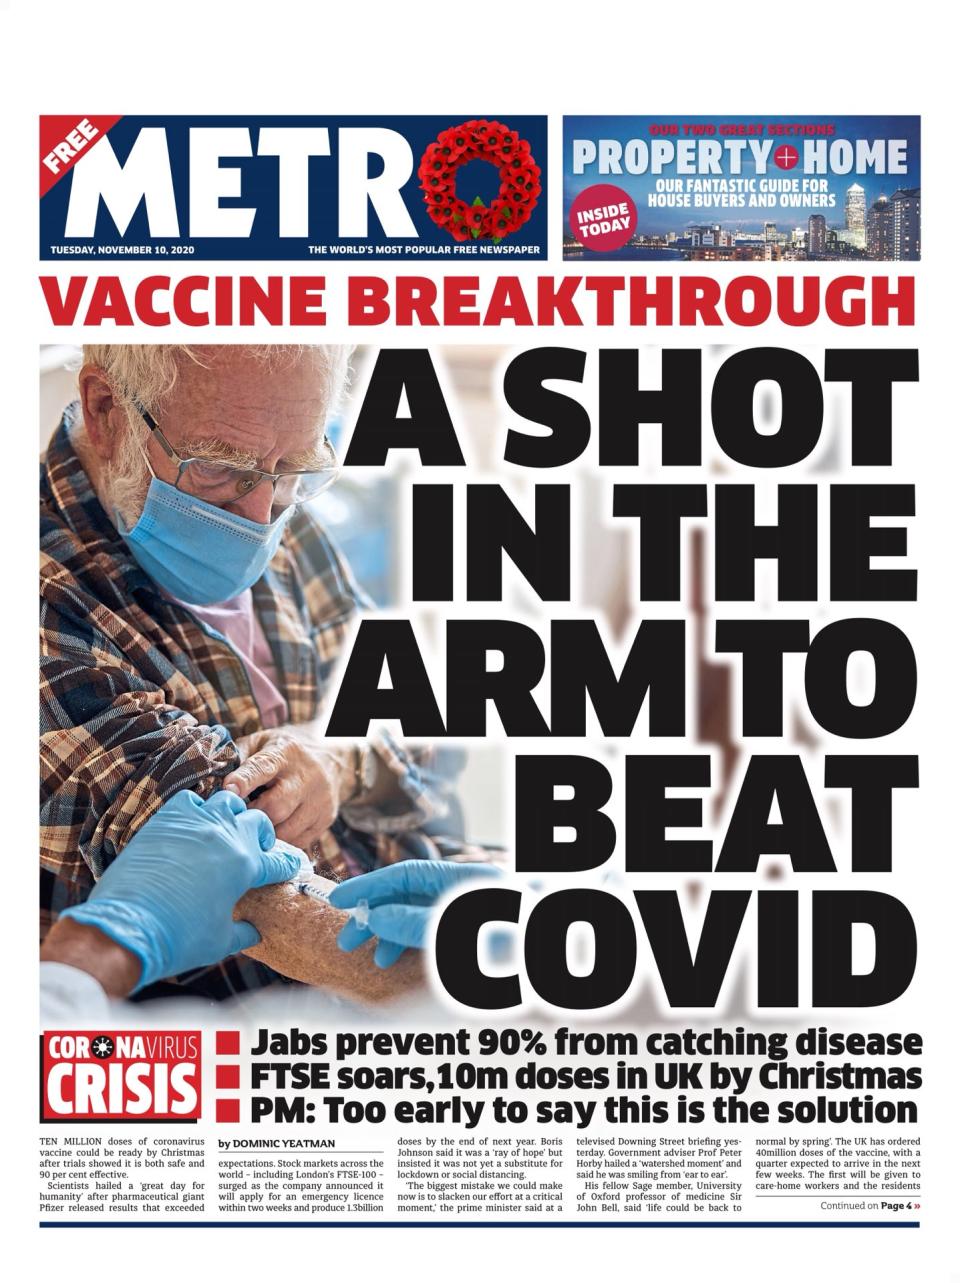 Metro said the vaccine trial was a 'shot in the arm to beat COVID'.